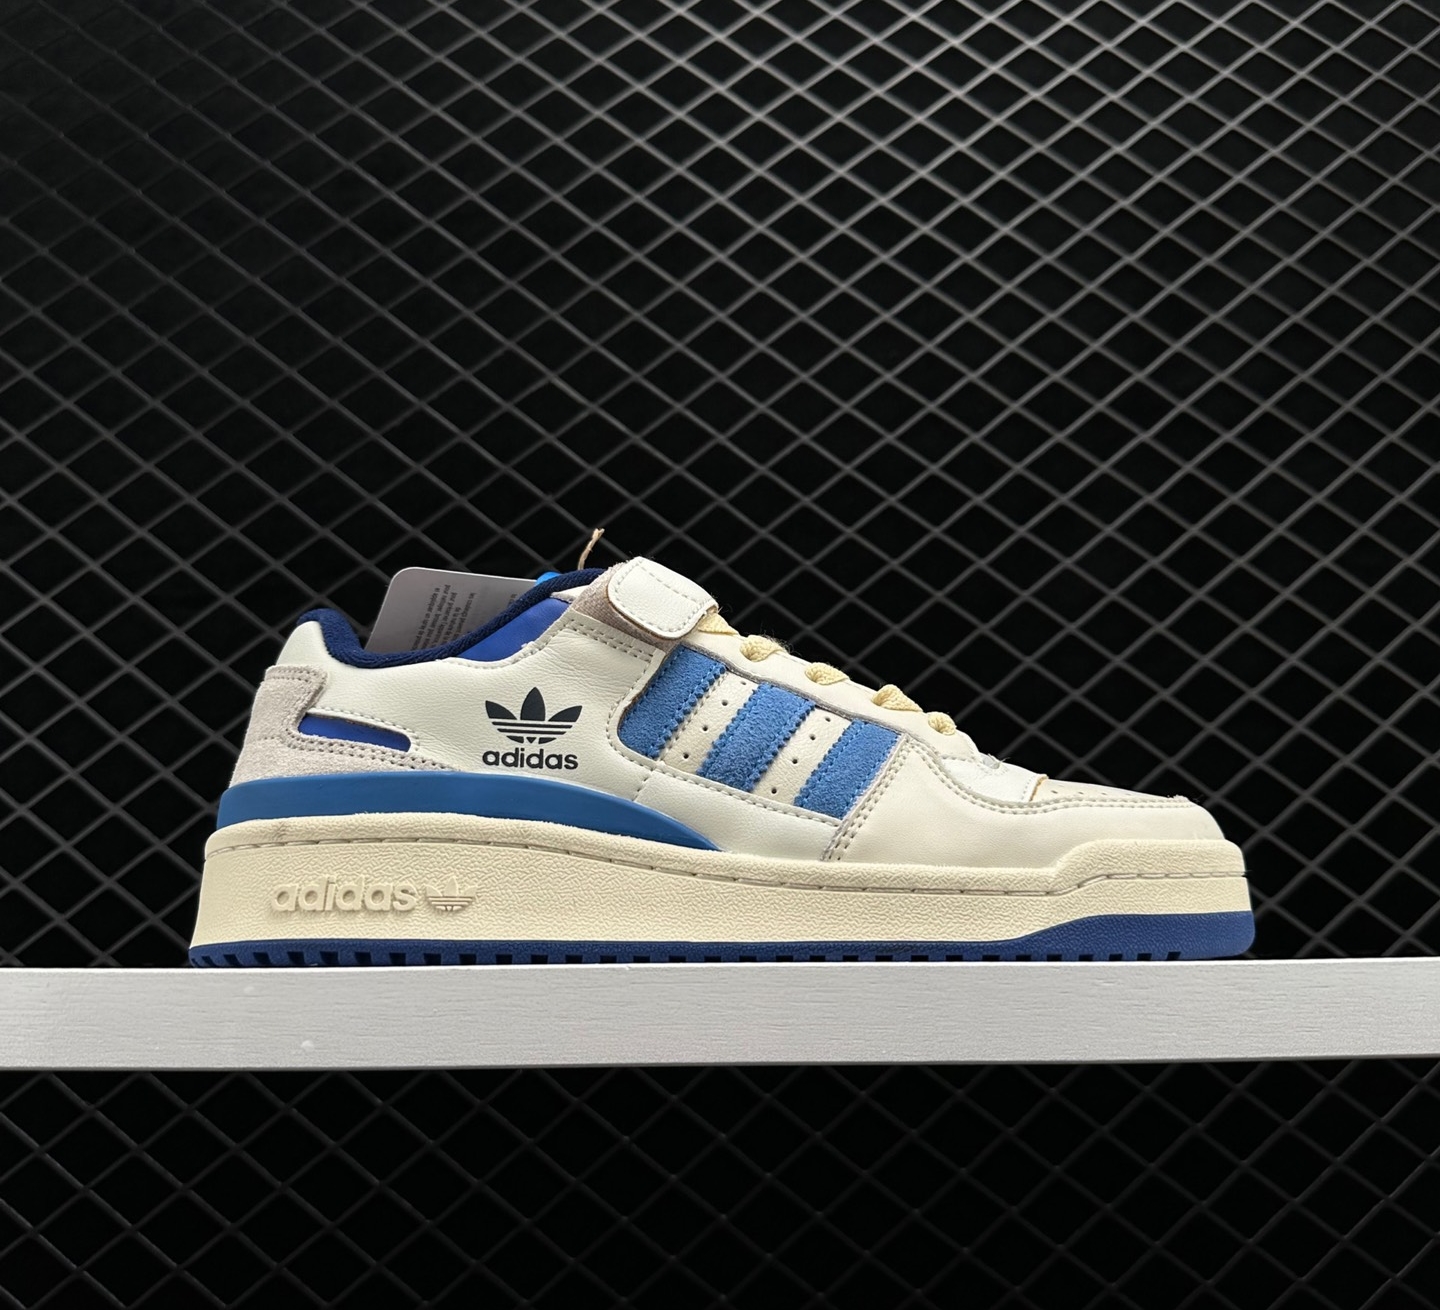 Adidas Forum 84 Low OG Bright Blue - Iconic Retro Sneakers